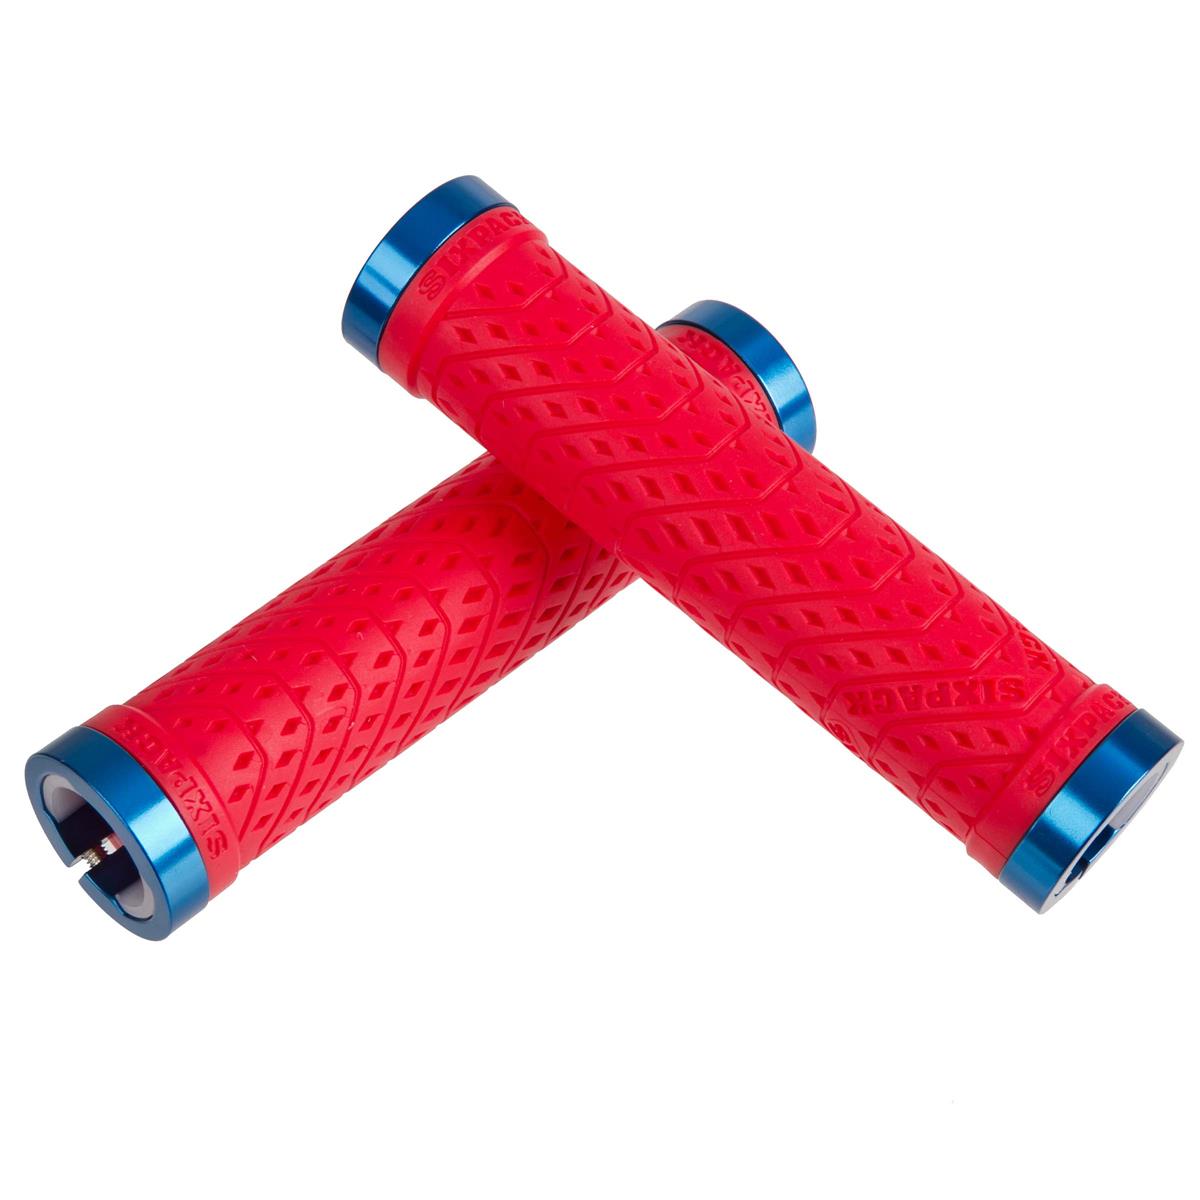 Sixpack MTB Grips K-Trix Red/Blue, Lock On System, 140 mm Length